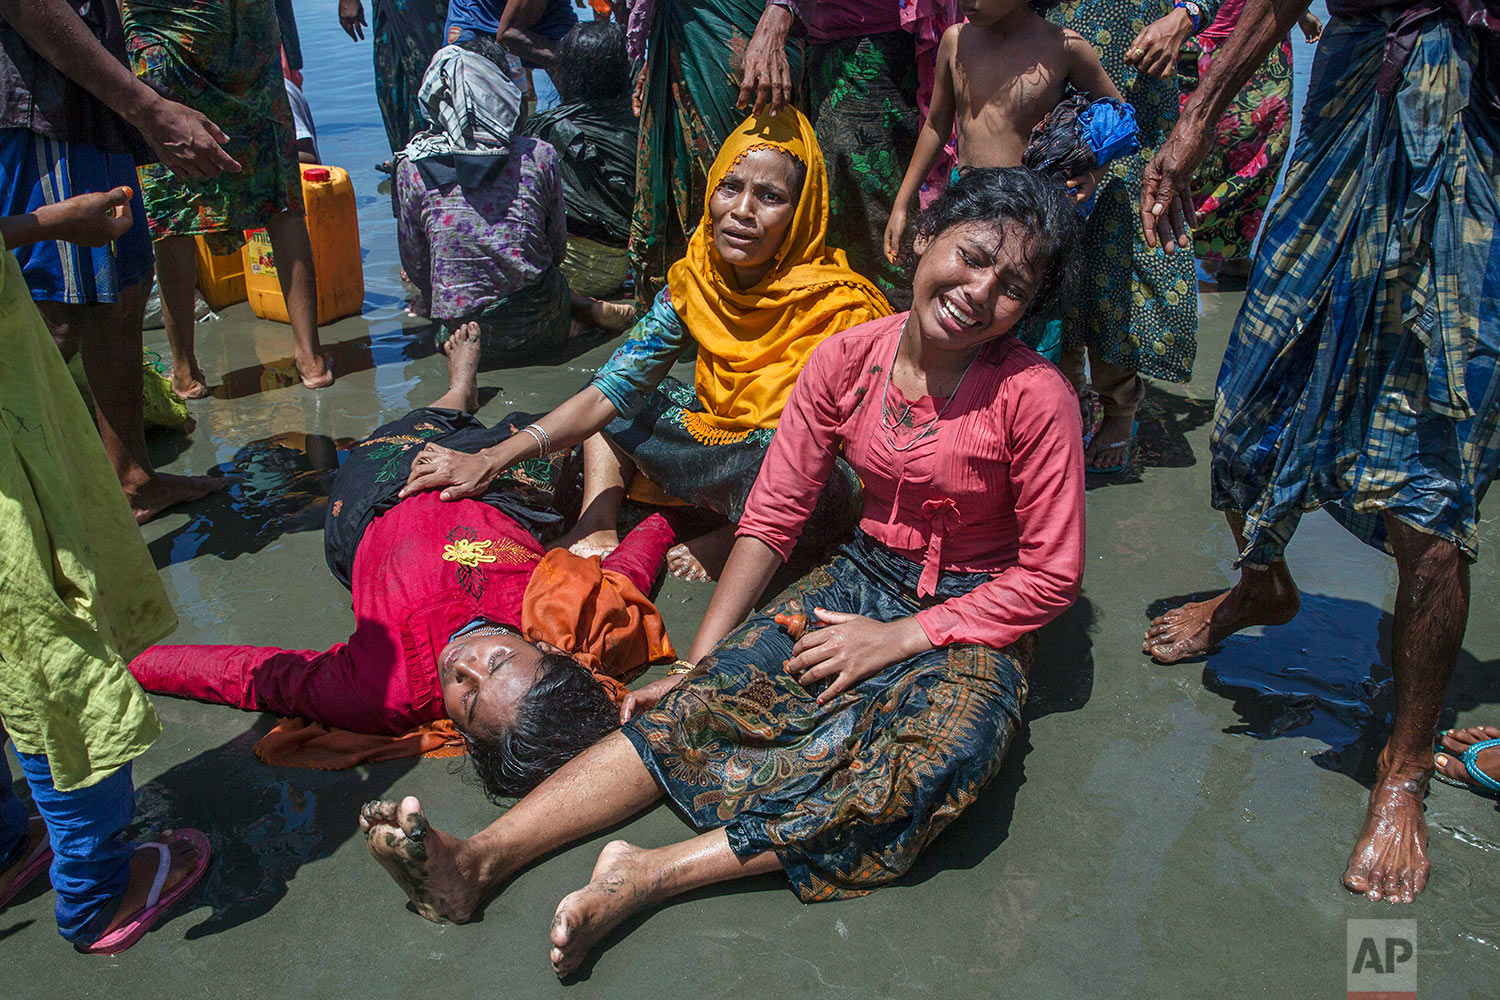 Rohingya Muslim women, who crossed over from Myanmar into Bangladesh, wail as a relative lies unconscious after the boat they were traveling in capsized minutes before reaching shore at Shah Porir Dwip, Bangladesh, Thursday, Sept. 14, 2017. The woman survived. (AP Photo/Dar Yasin)